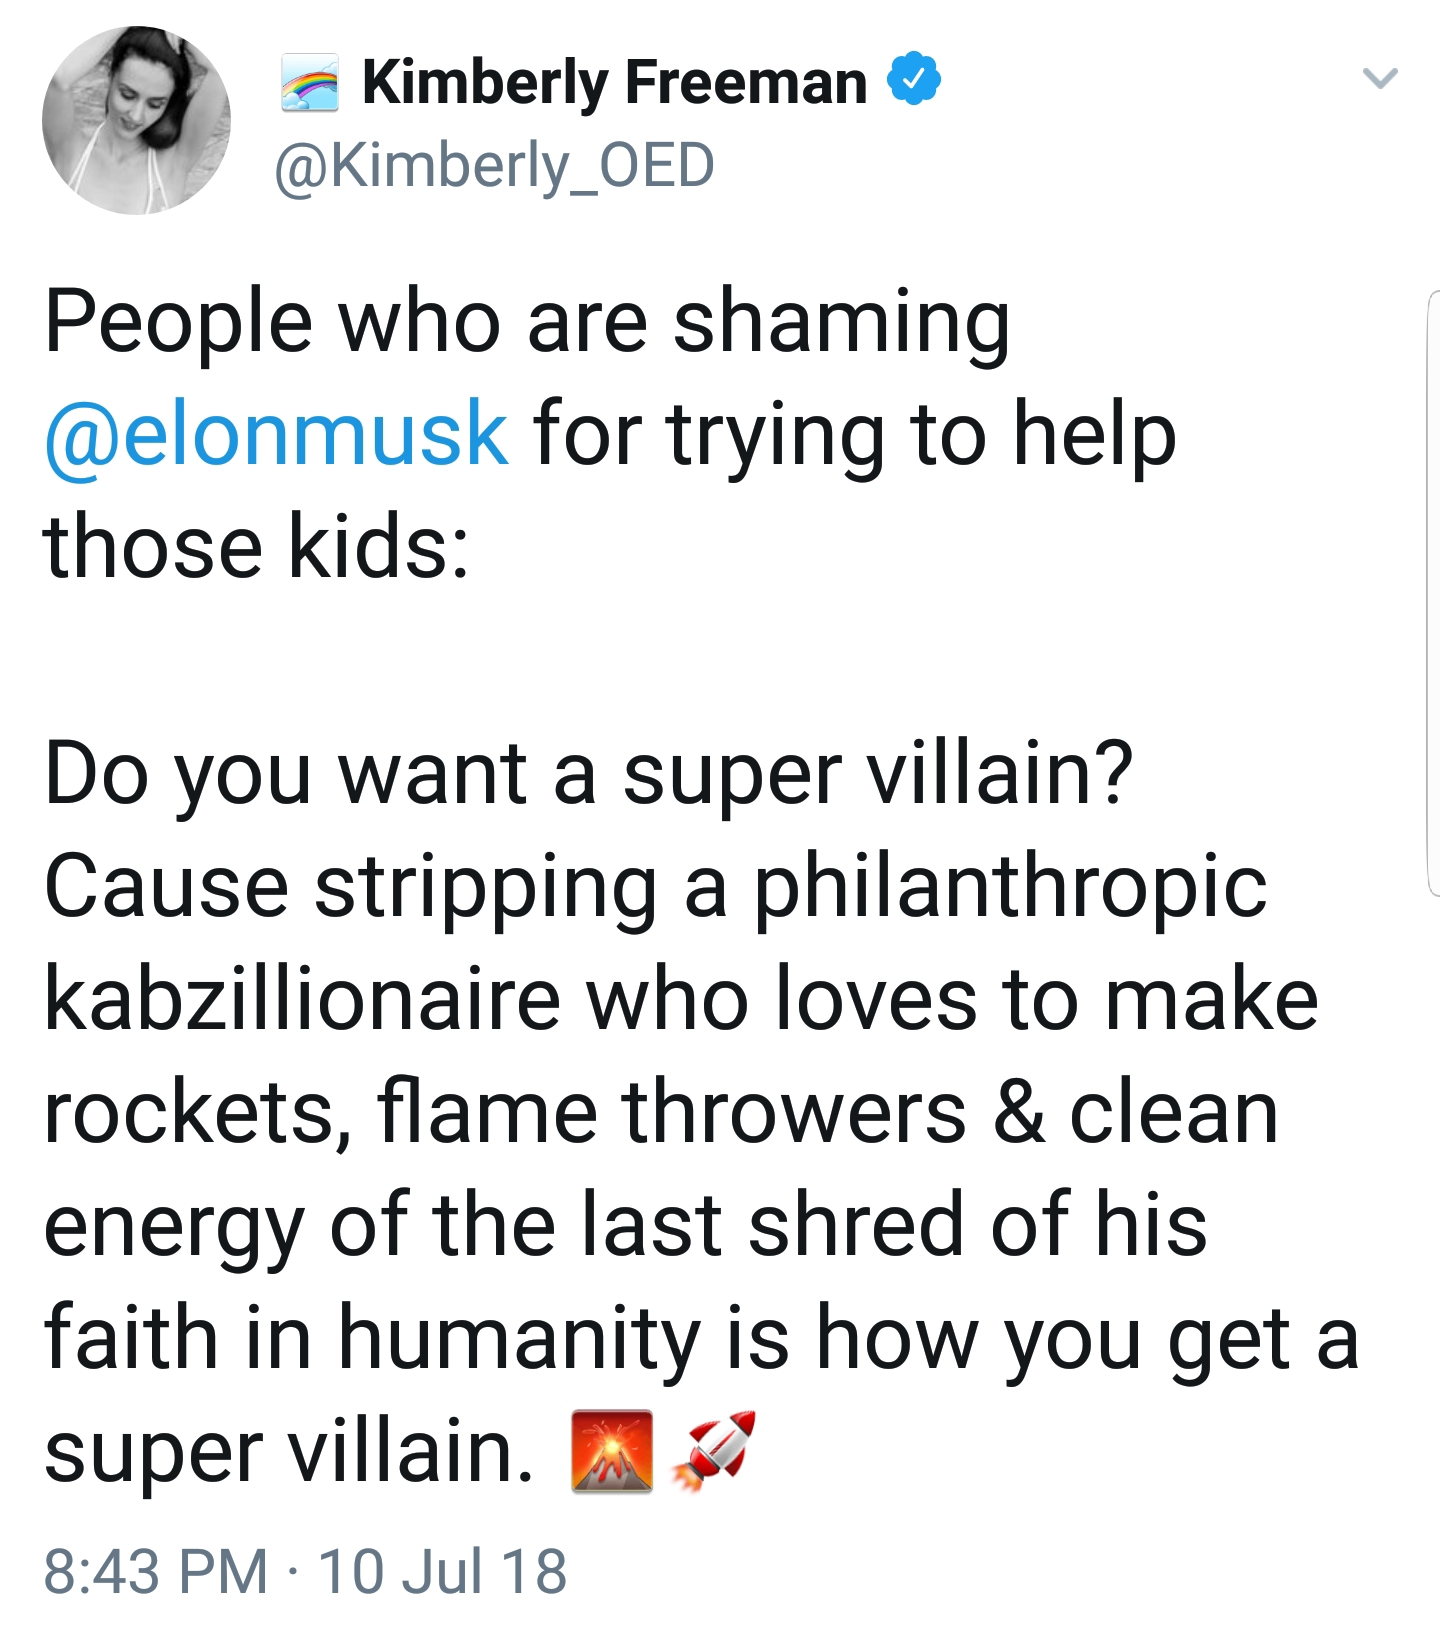 Kimberly Freeman People who are shaming for trying to help those kids Do you want a super villain? Cause stripping a philanthropic kabzillionaire who loves to make rockets, flame throwers & clean energy of the last shred of his faith in humanity is how yo